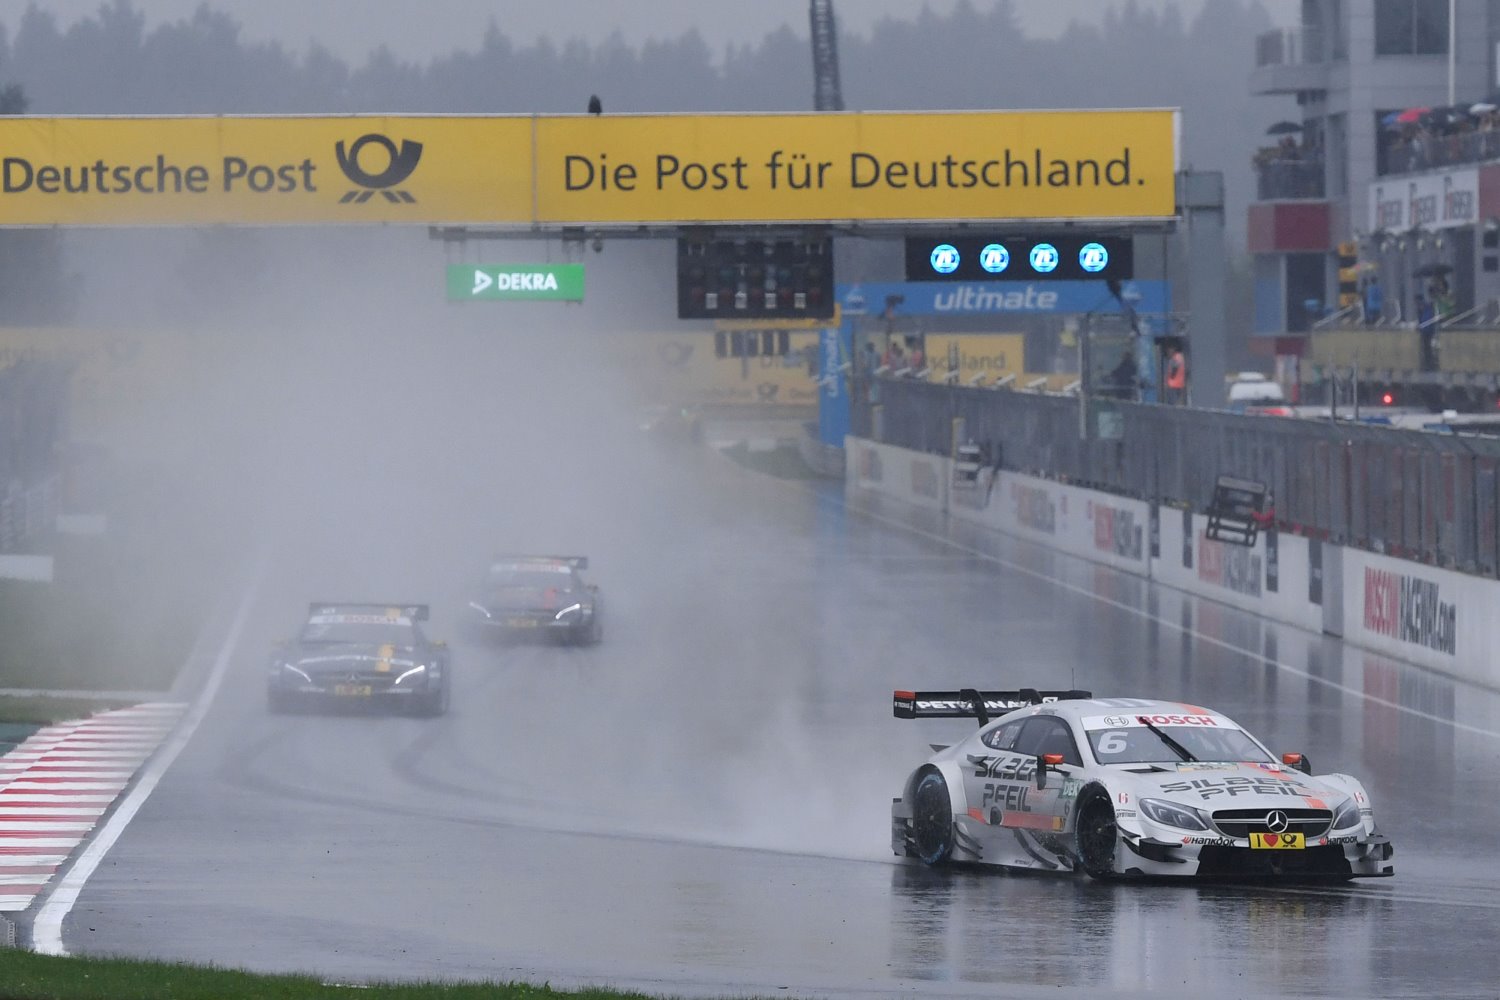 The Moscow race weekend was wet this year